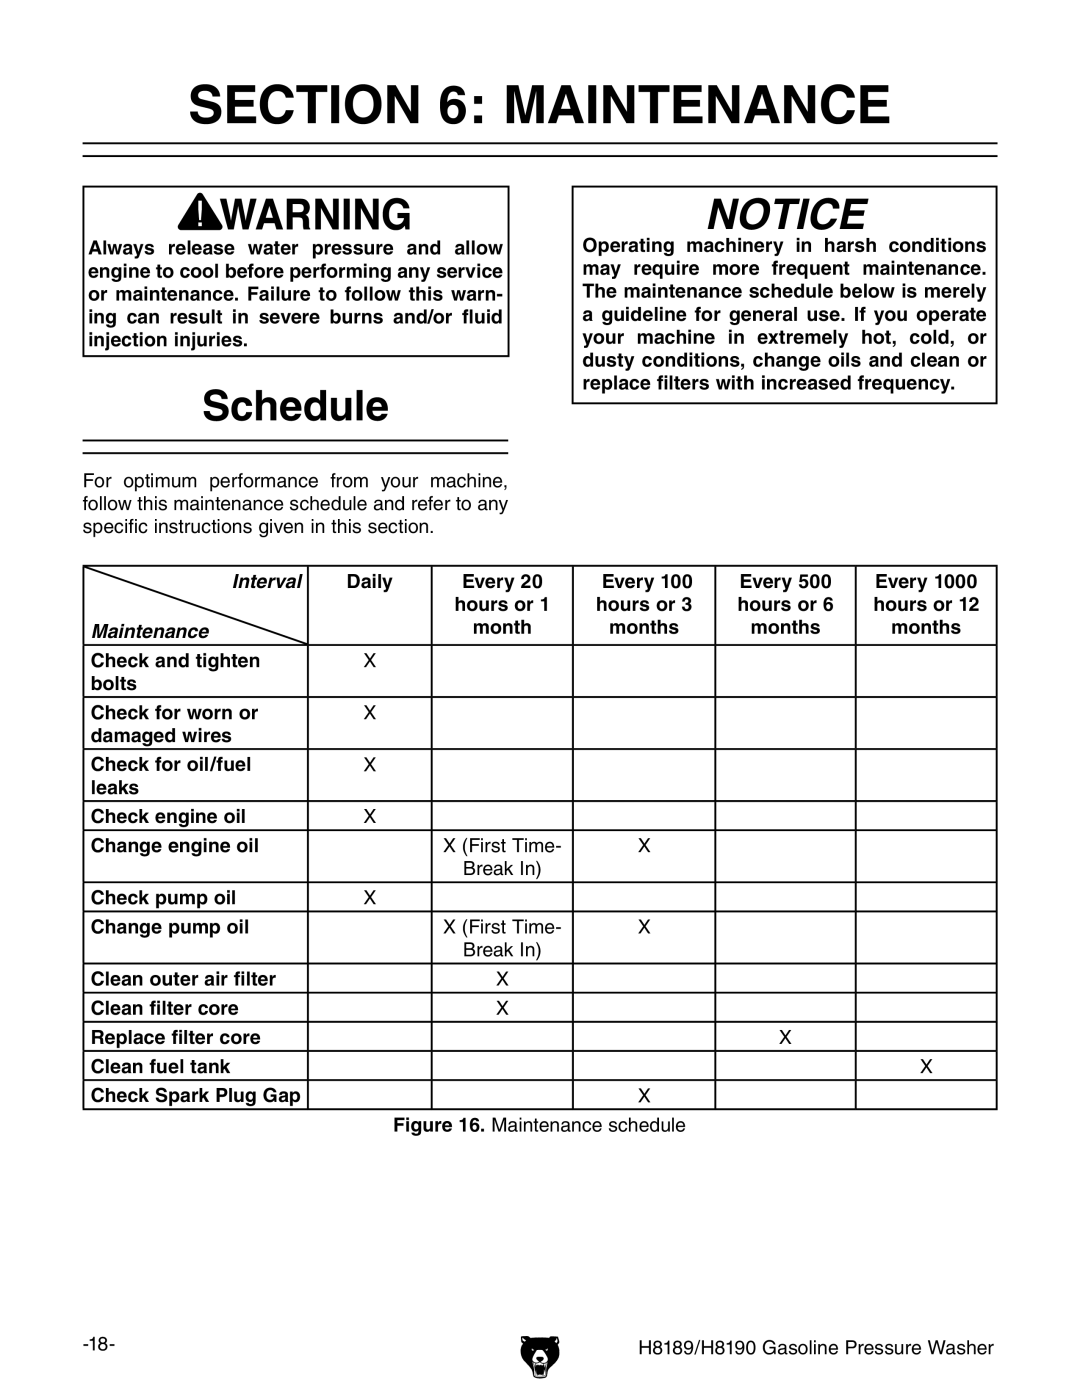 Grizzly H8189/H8190 owner manual Maintenance, Schedule, Notice 